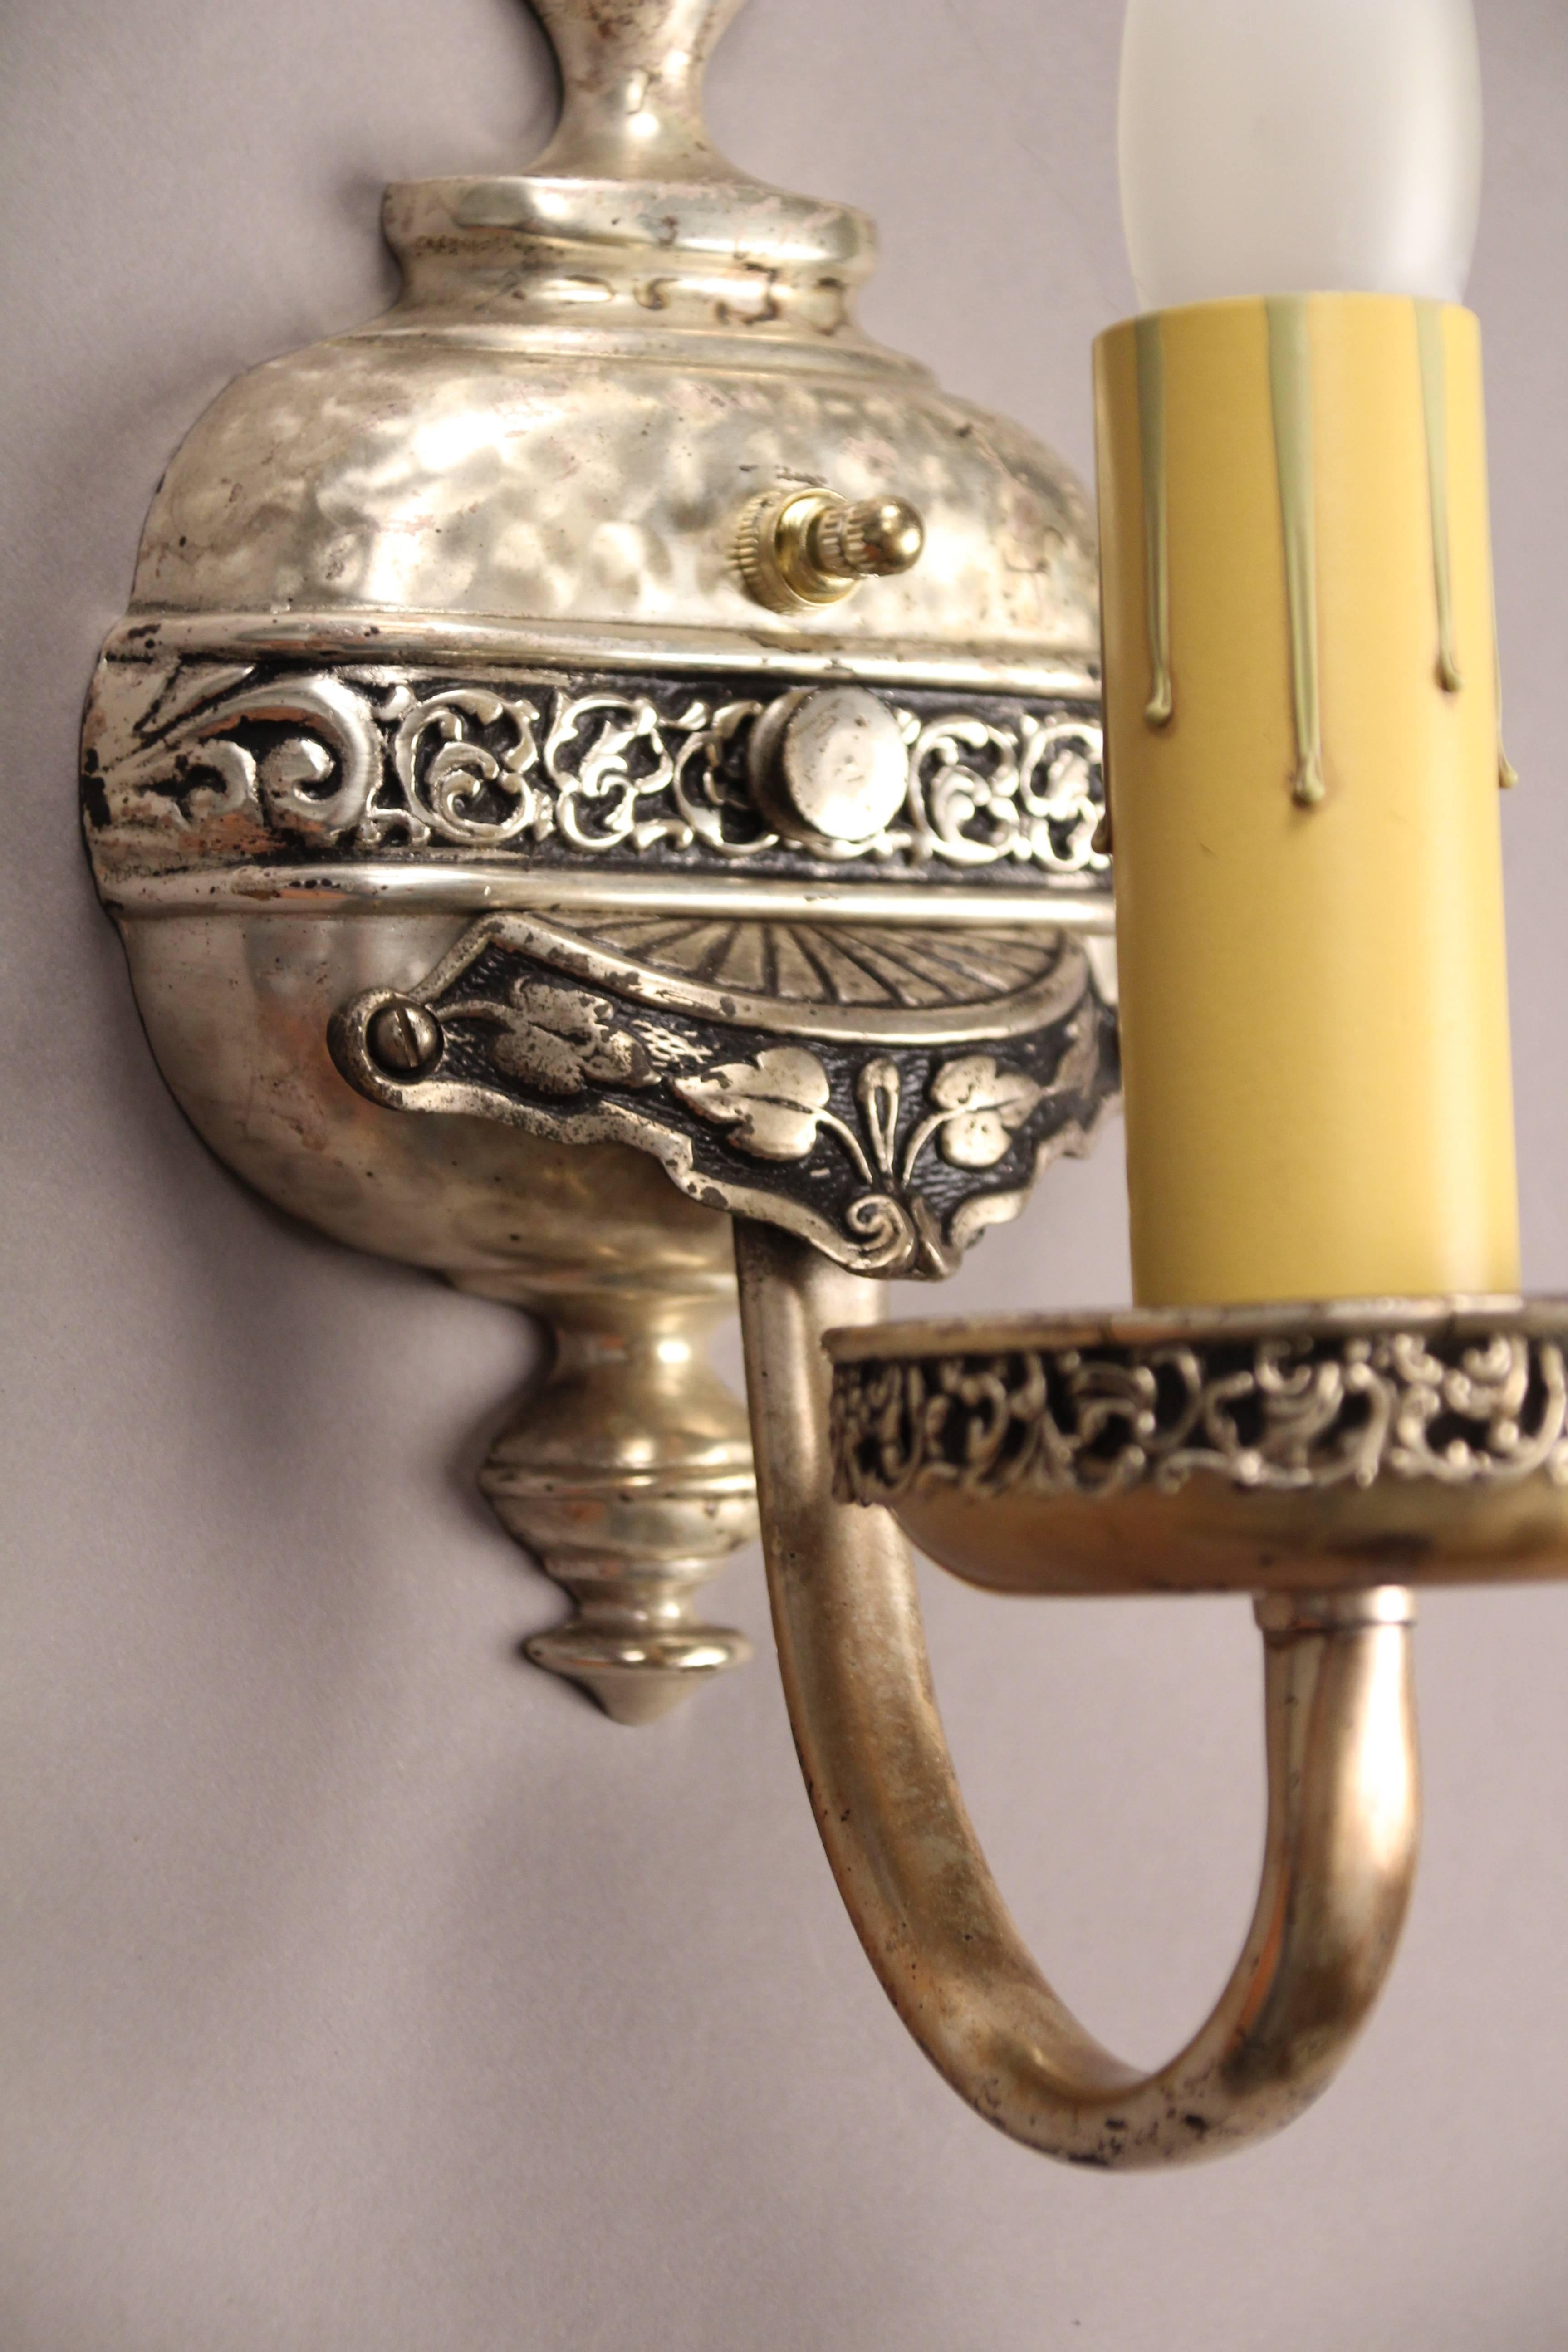 Sold and priced individually. Very nice single sconces with silver finish. Great casting, circa 1920s measure: 12.5